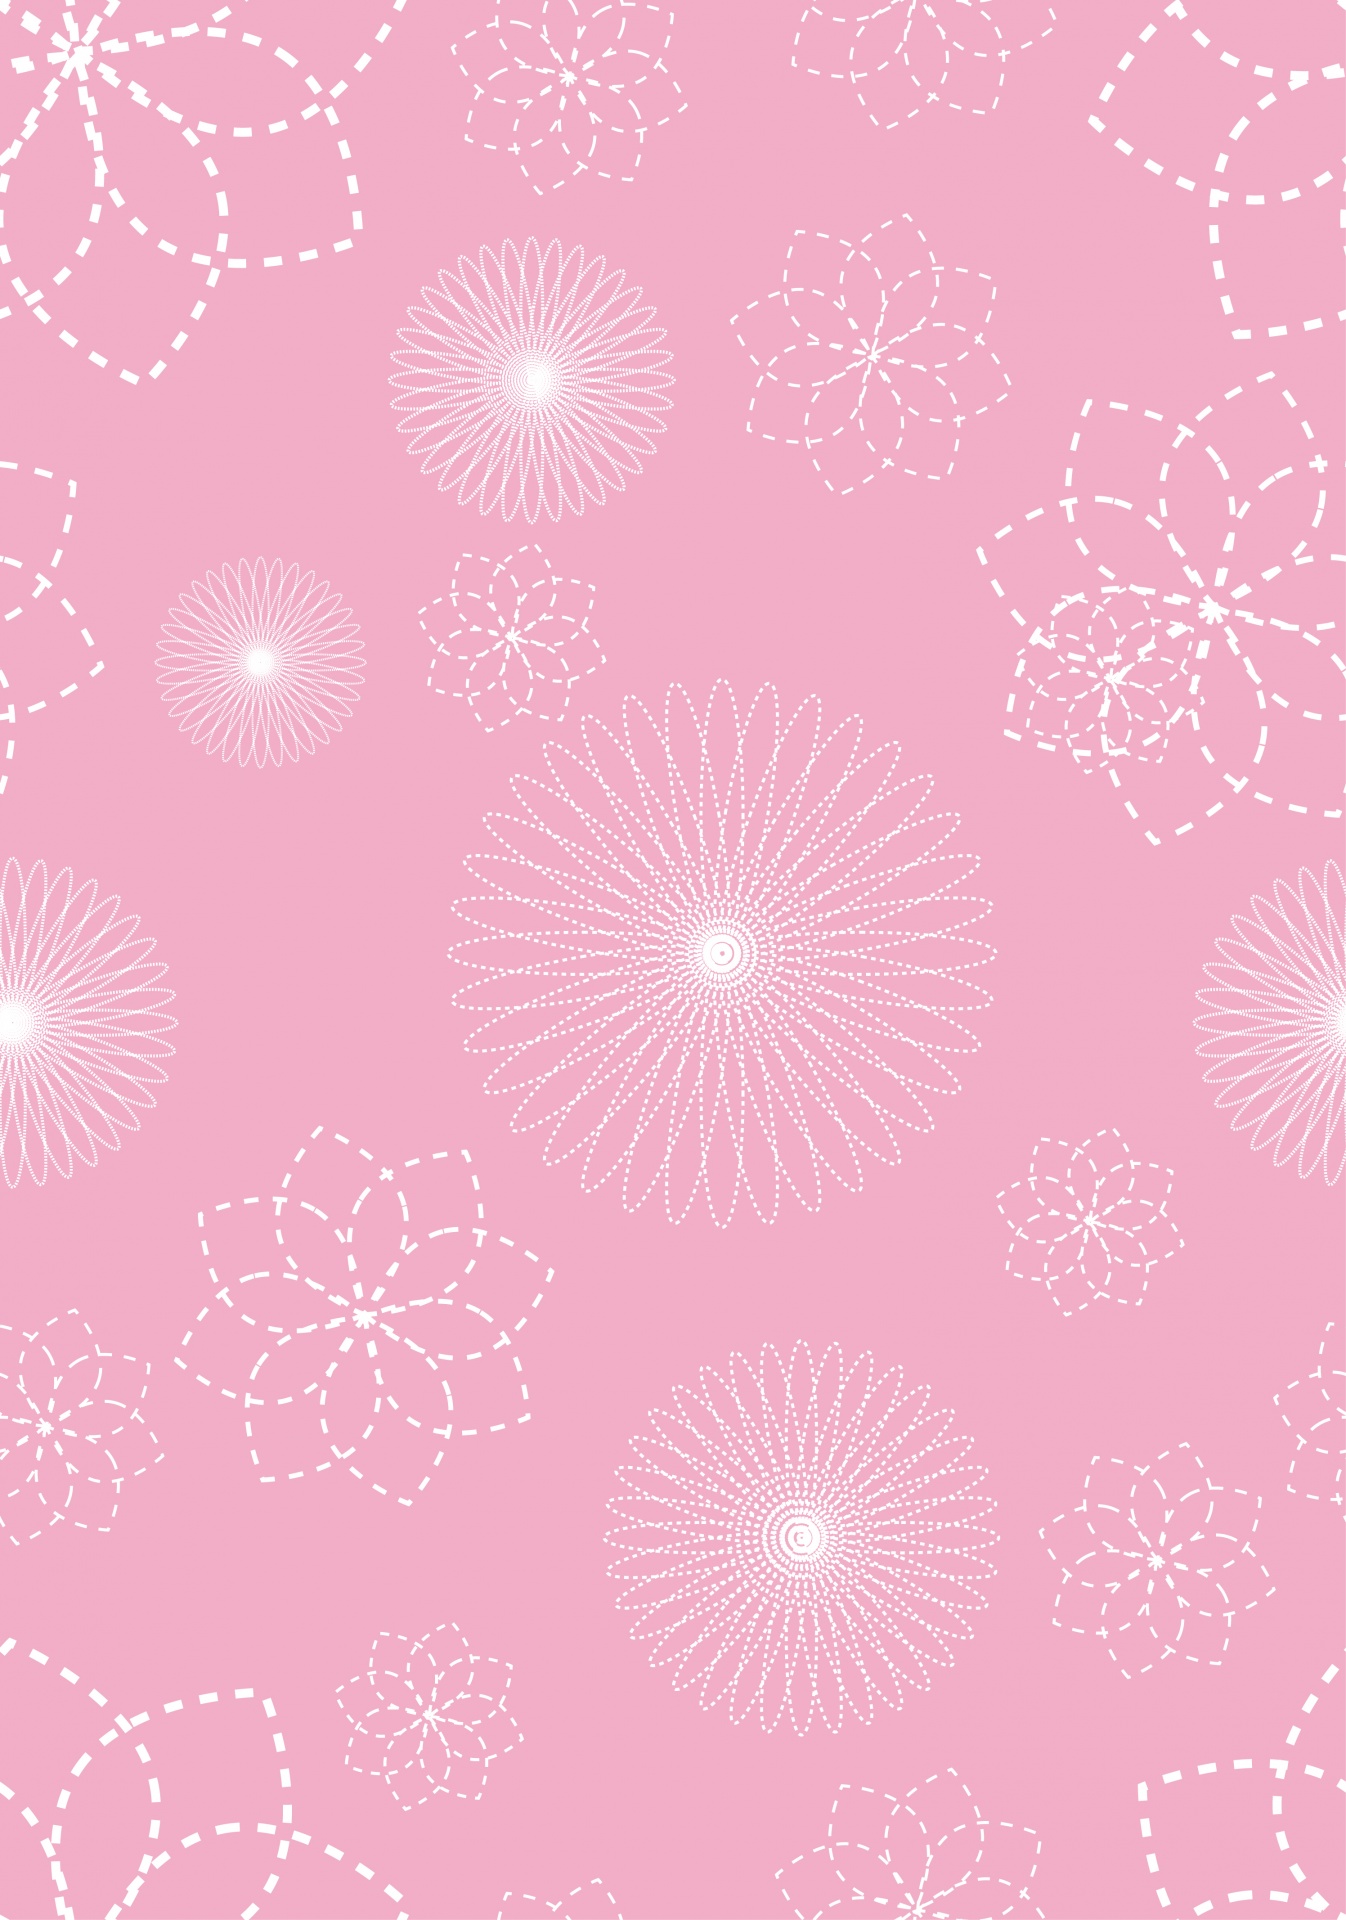 Pink and white seamless abstract spiral flowers pattern background wallpaper